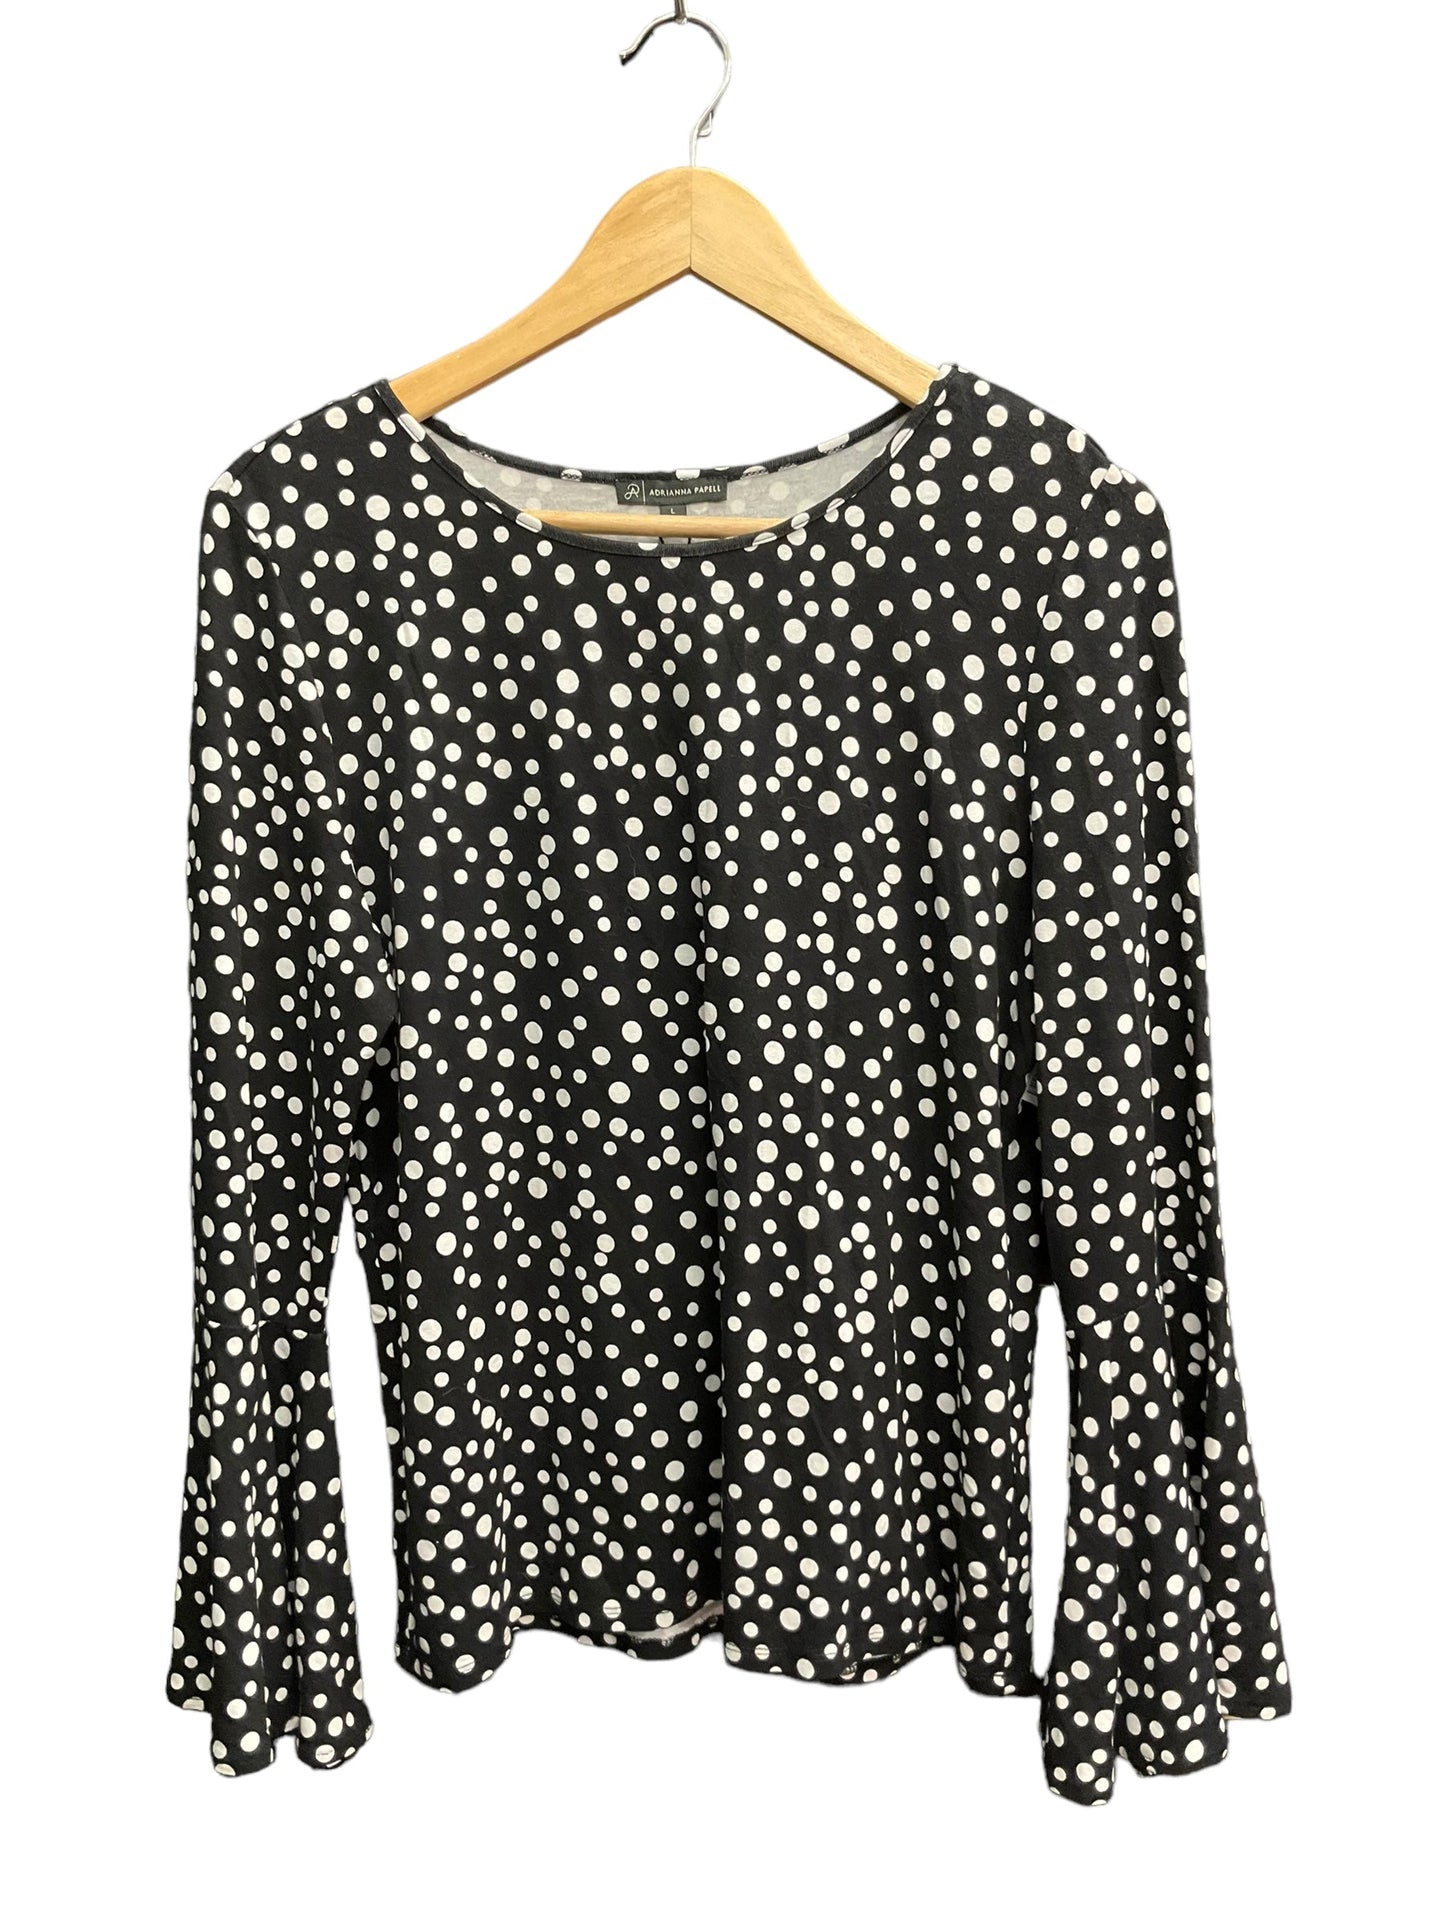 Polkadot Pattern Top Long Sleeve Adrianna Papell, Size L